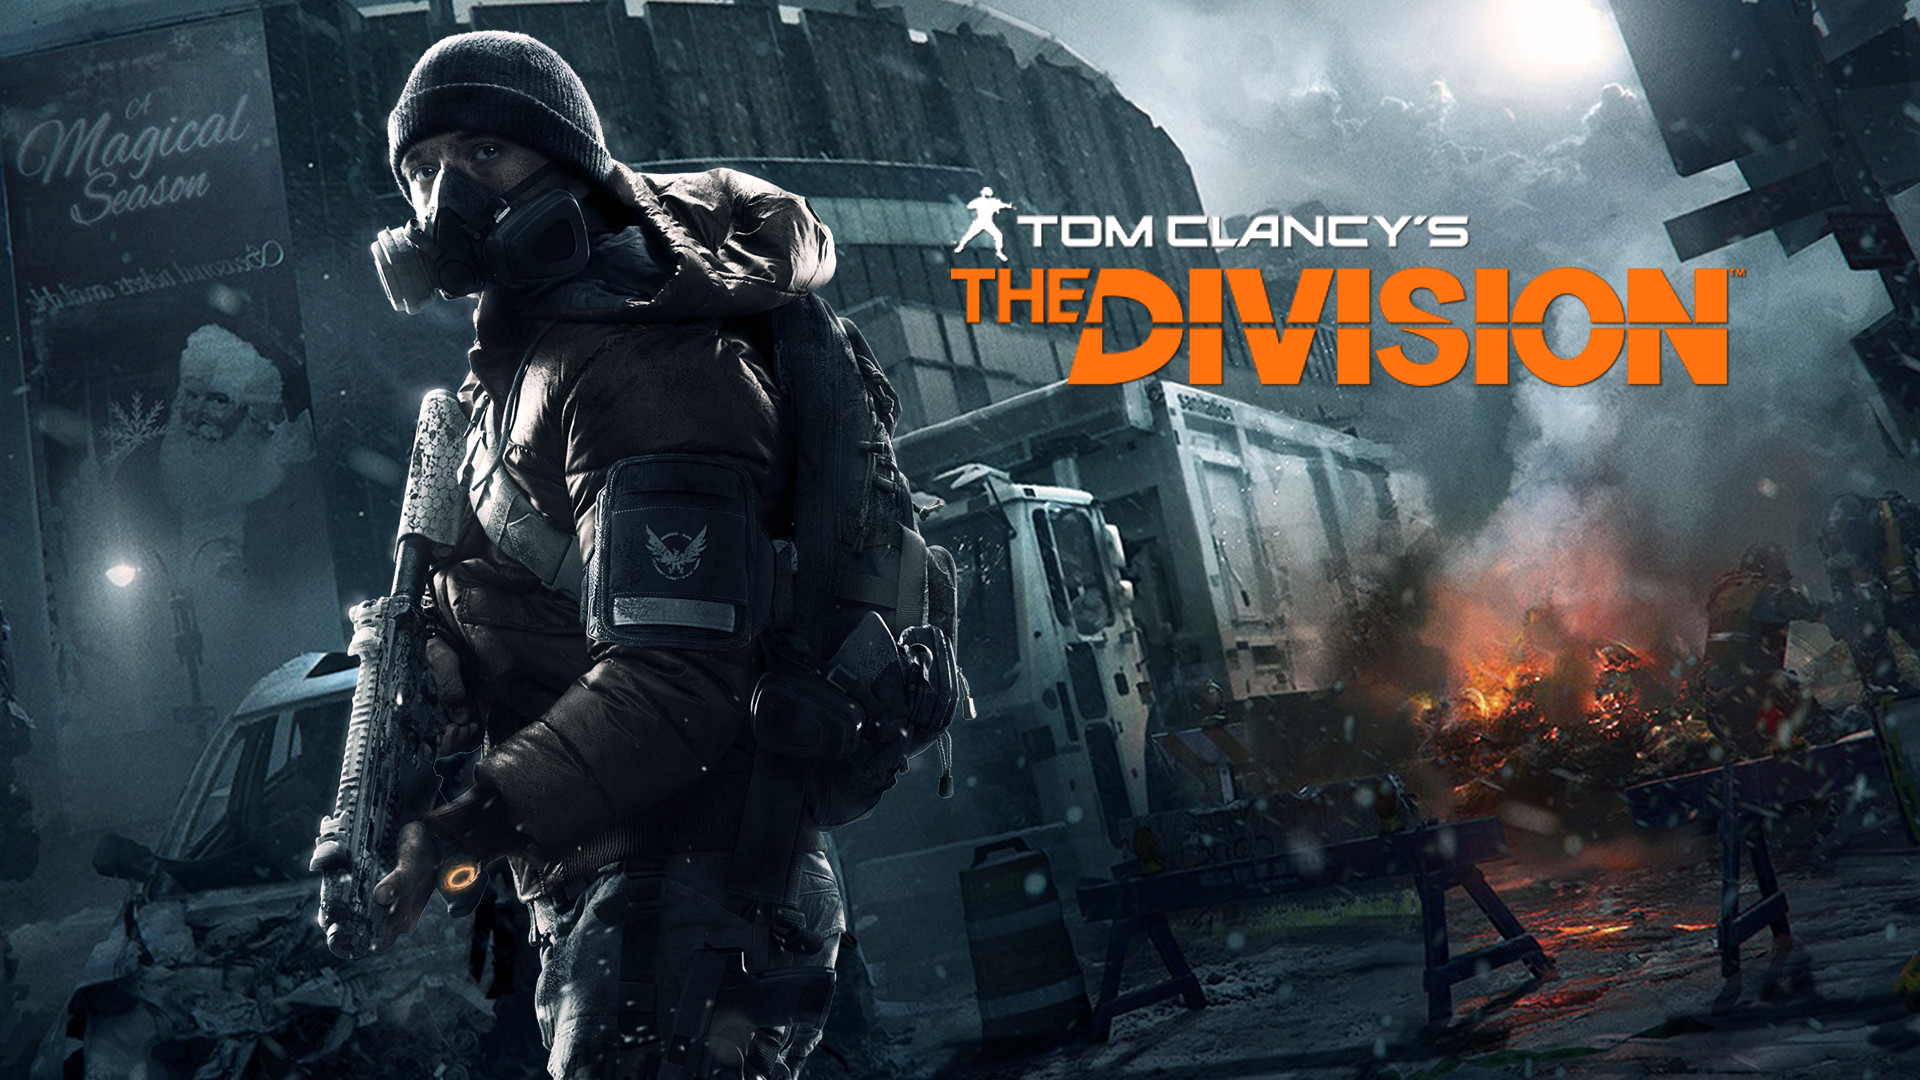 1920x1080 ... The Division - PS4 HD Wallpaper by EversonTomiello